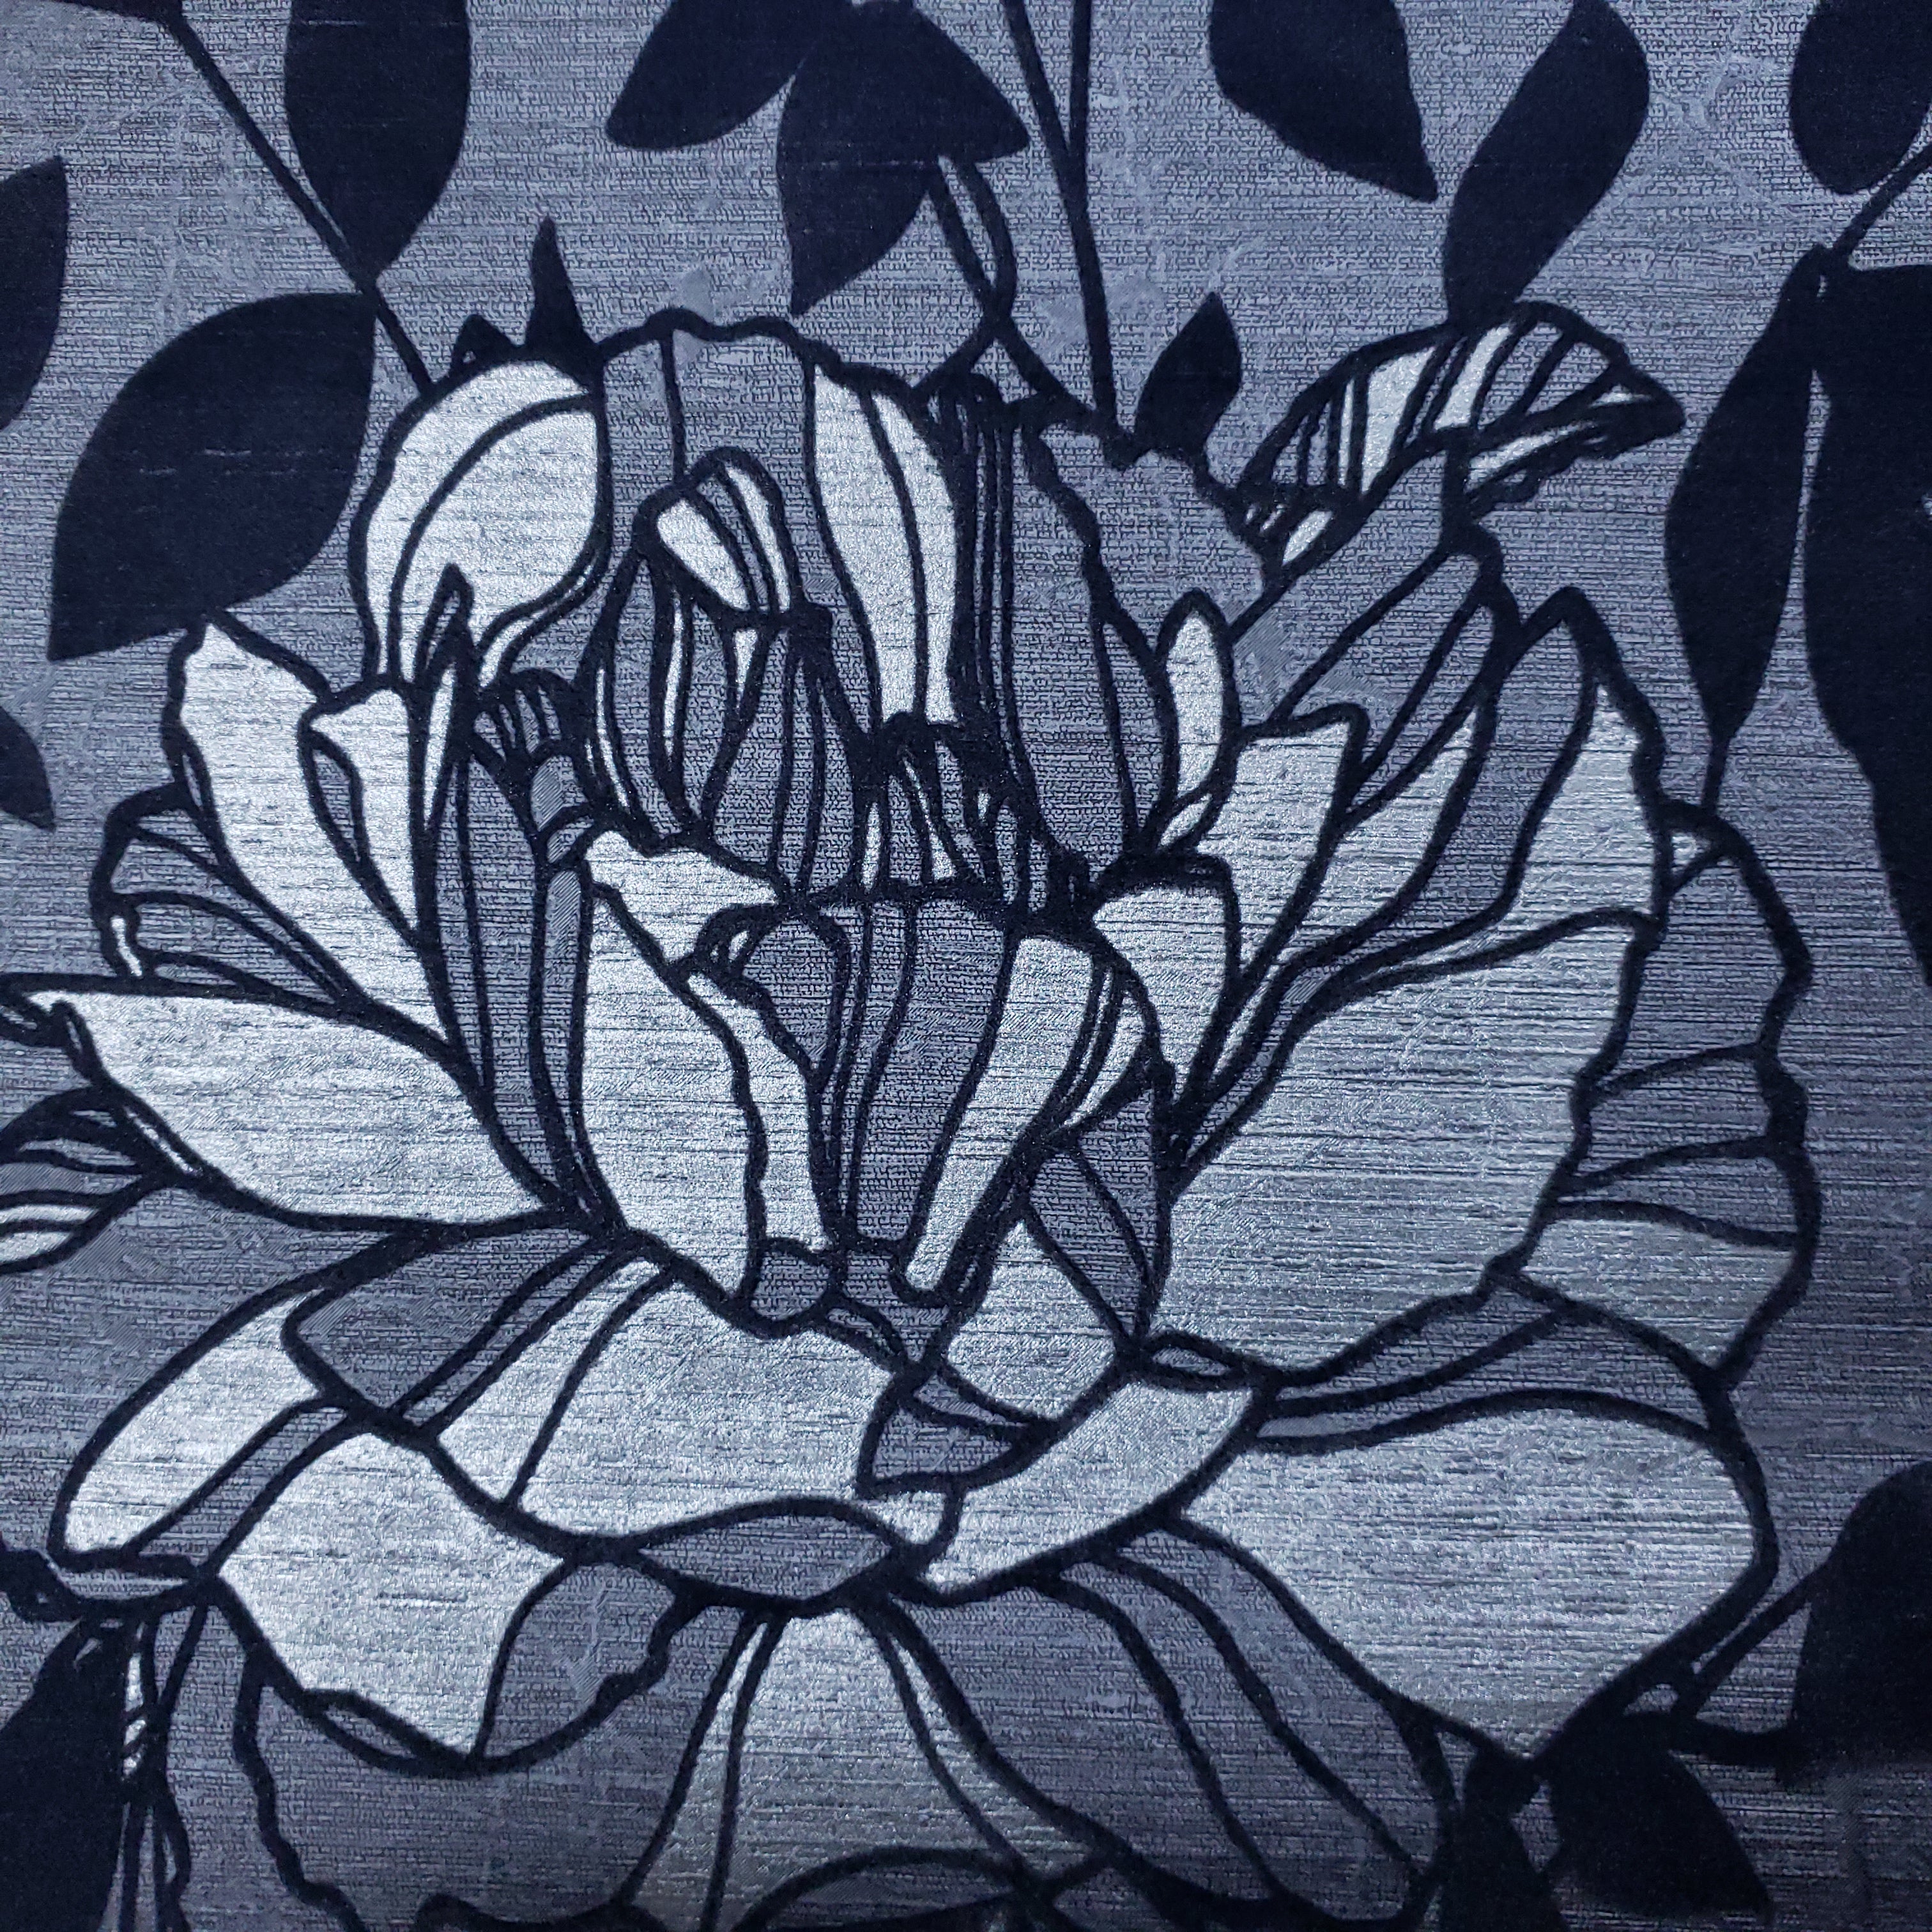 50 banknote on blue and white floral textile photo – Free Grey Image on  Unsplash